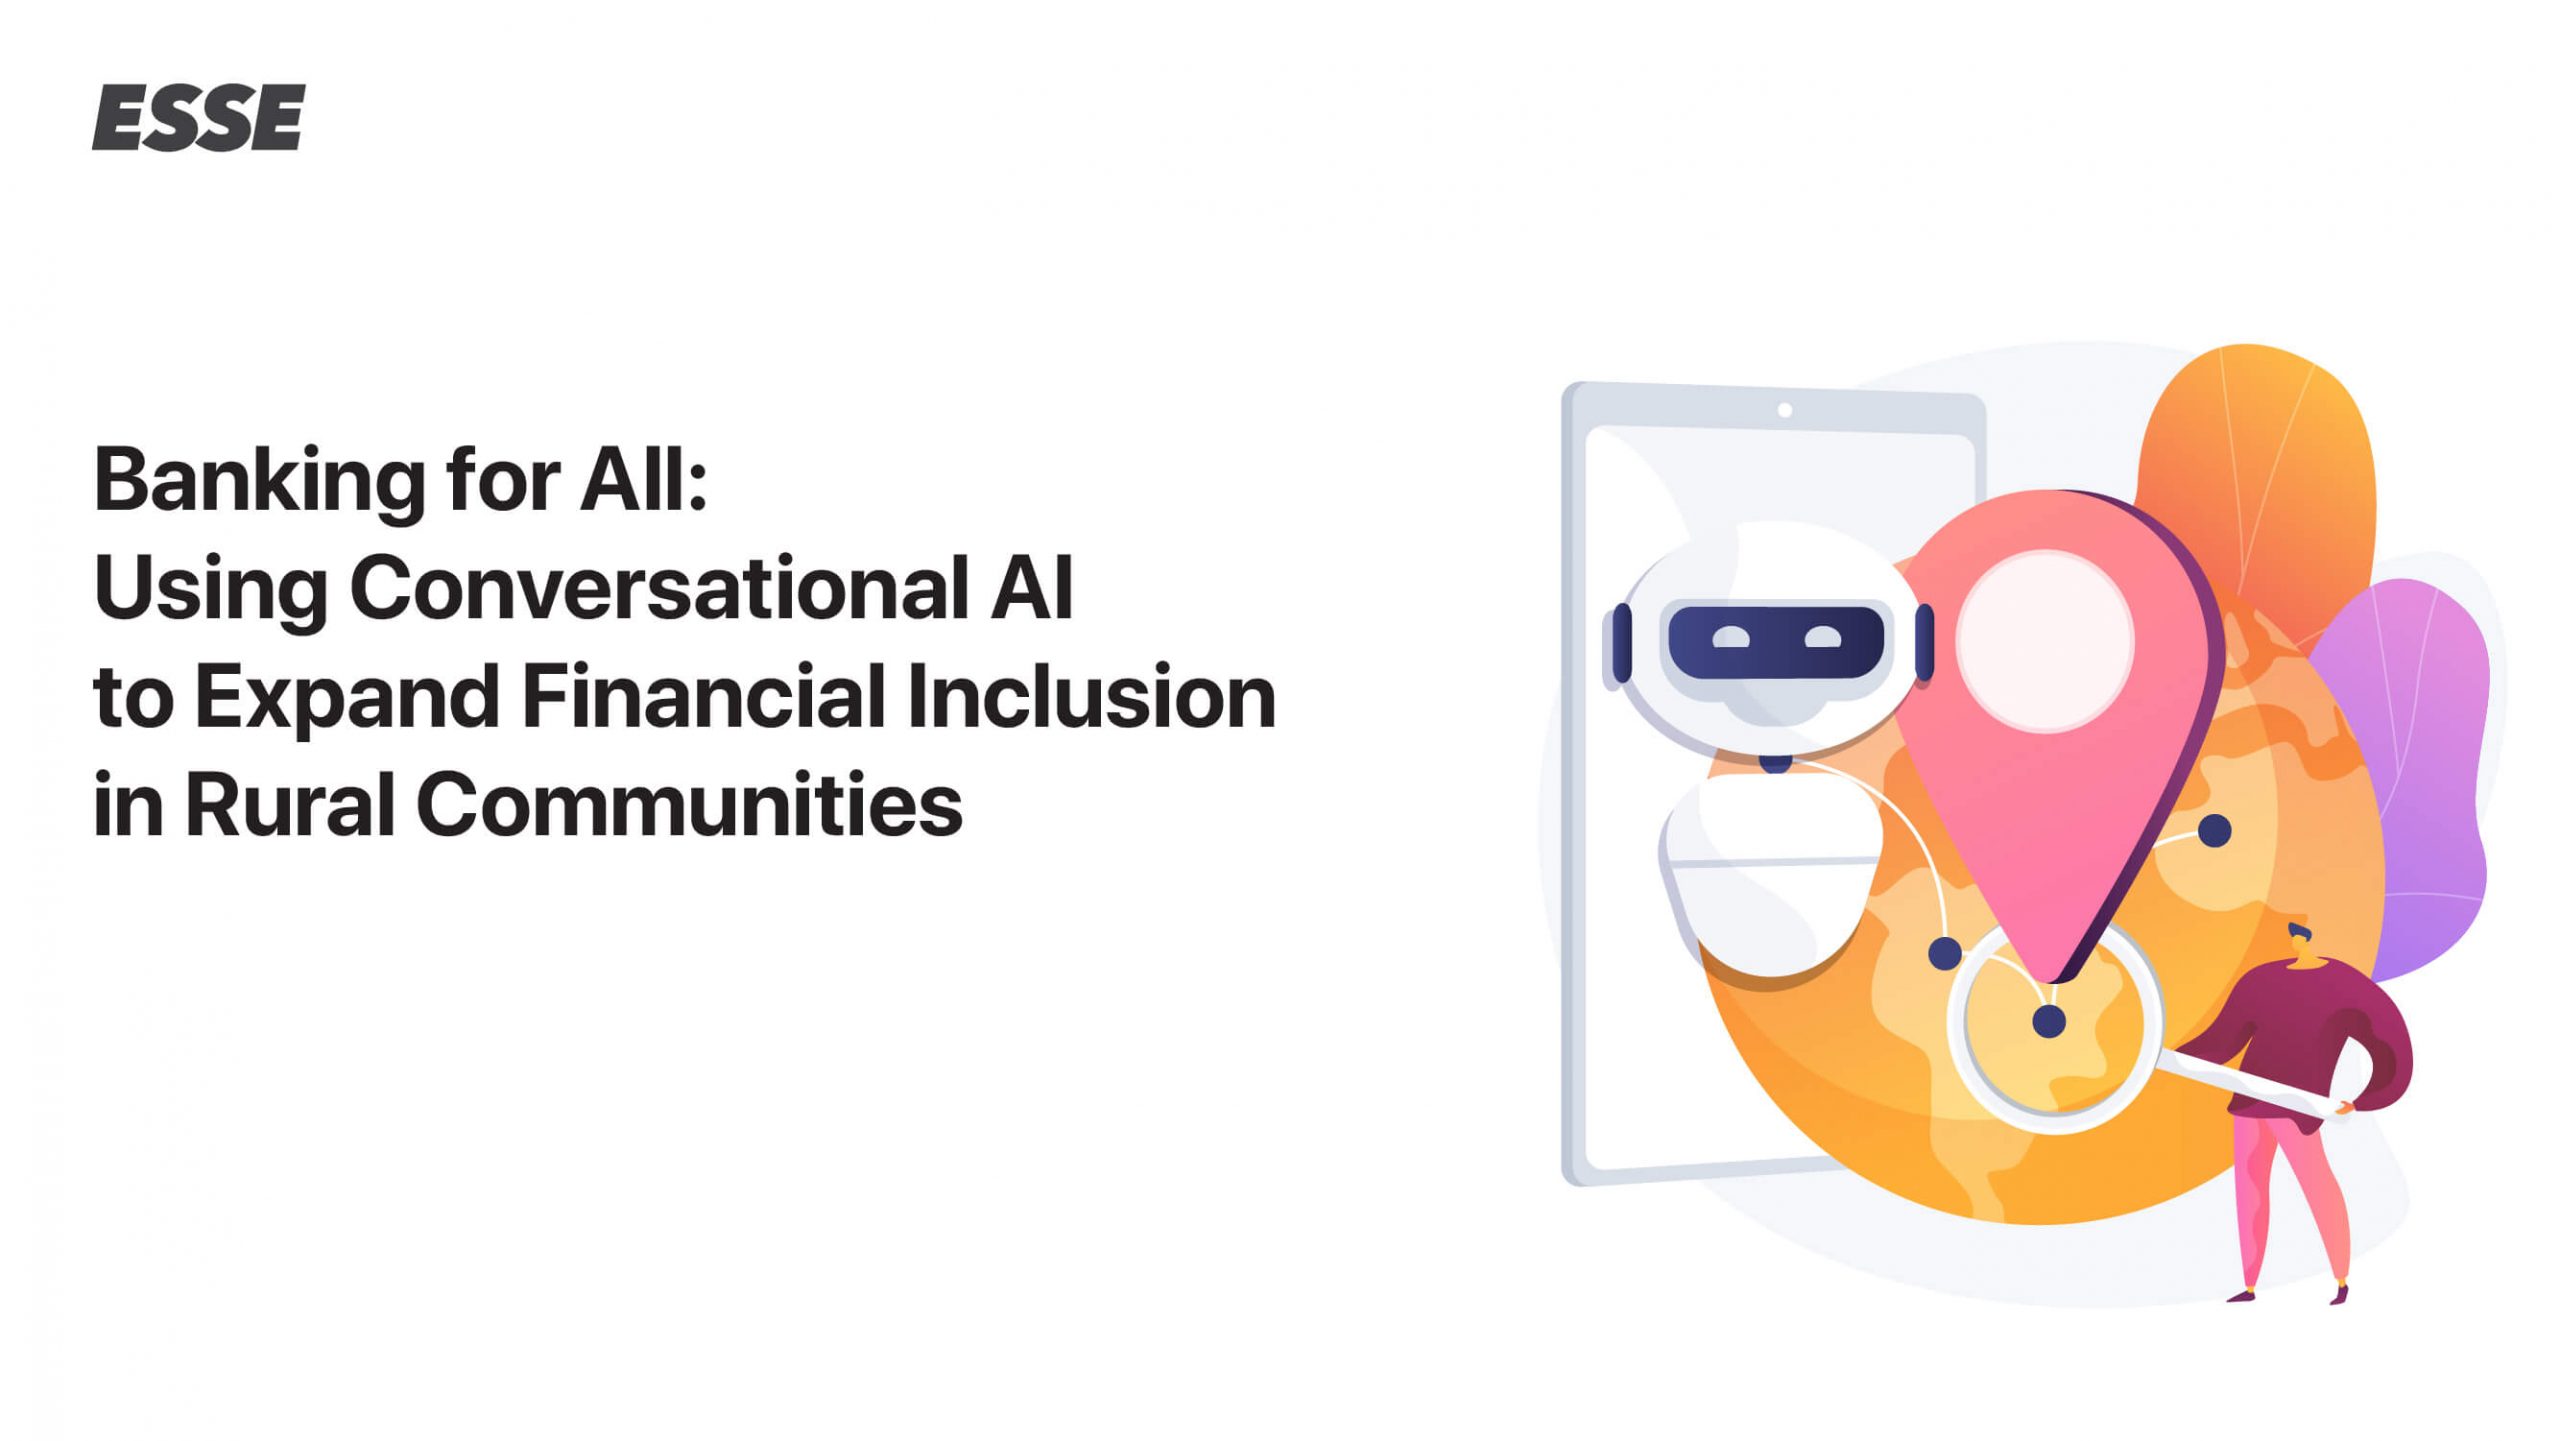 Banking for All: Using Conversational AI to Expand Financial Inclusion in Rural Communities